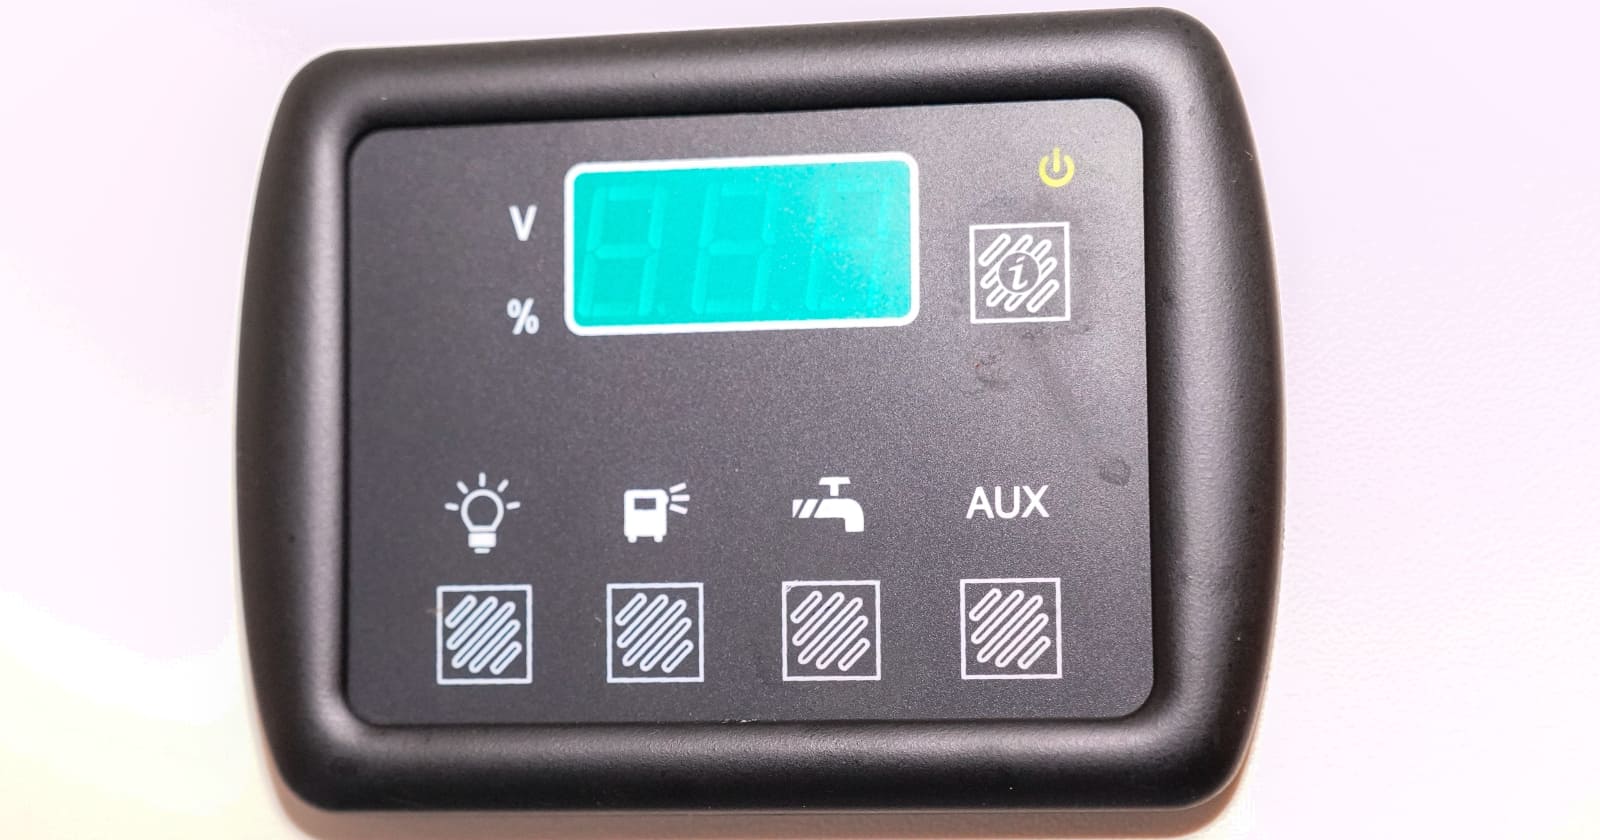 Control panel with icons: light bulb, heating coil, plug, tap, and 'AUX'. Backlit battery level bar in turquoise.